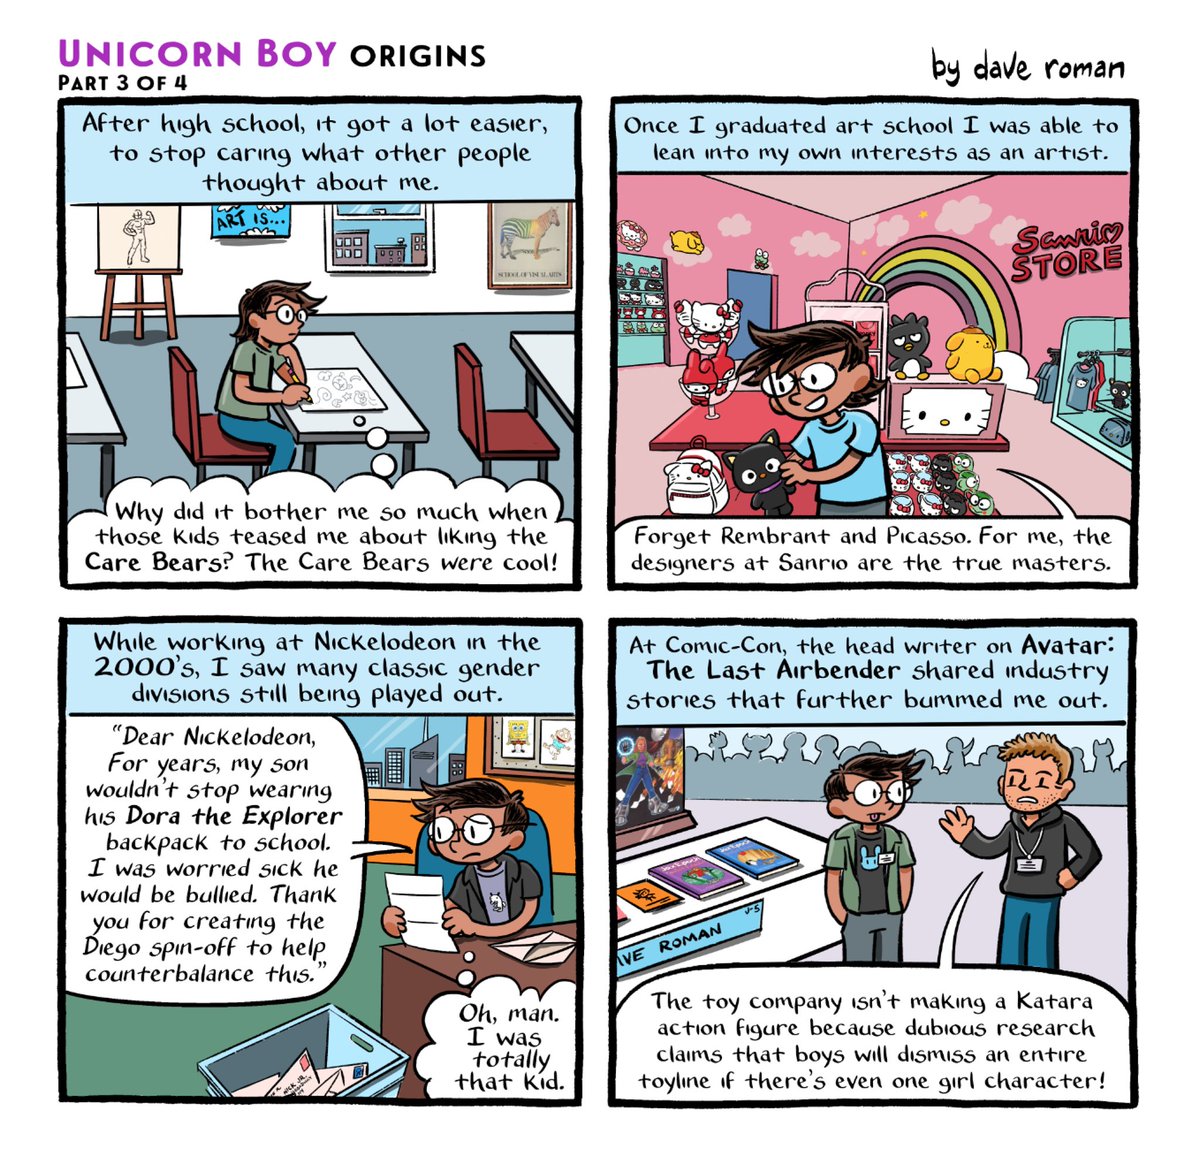 Part 3 in a series of “behind the comic” anecdotes that I drew in response to queries about my latest book, Unicorn Boy. Adventures in the 2000s when I fully leaned into my passion for “cute art” and got to see how the cartoon sausages are made while working at Nickelodeon.